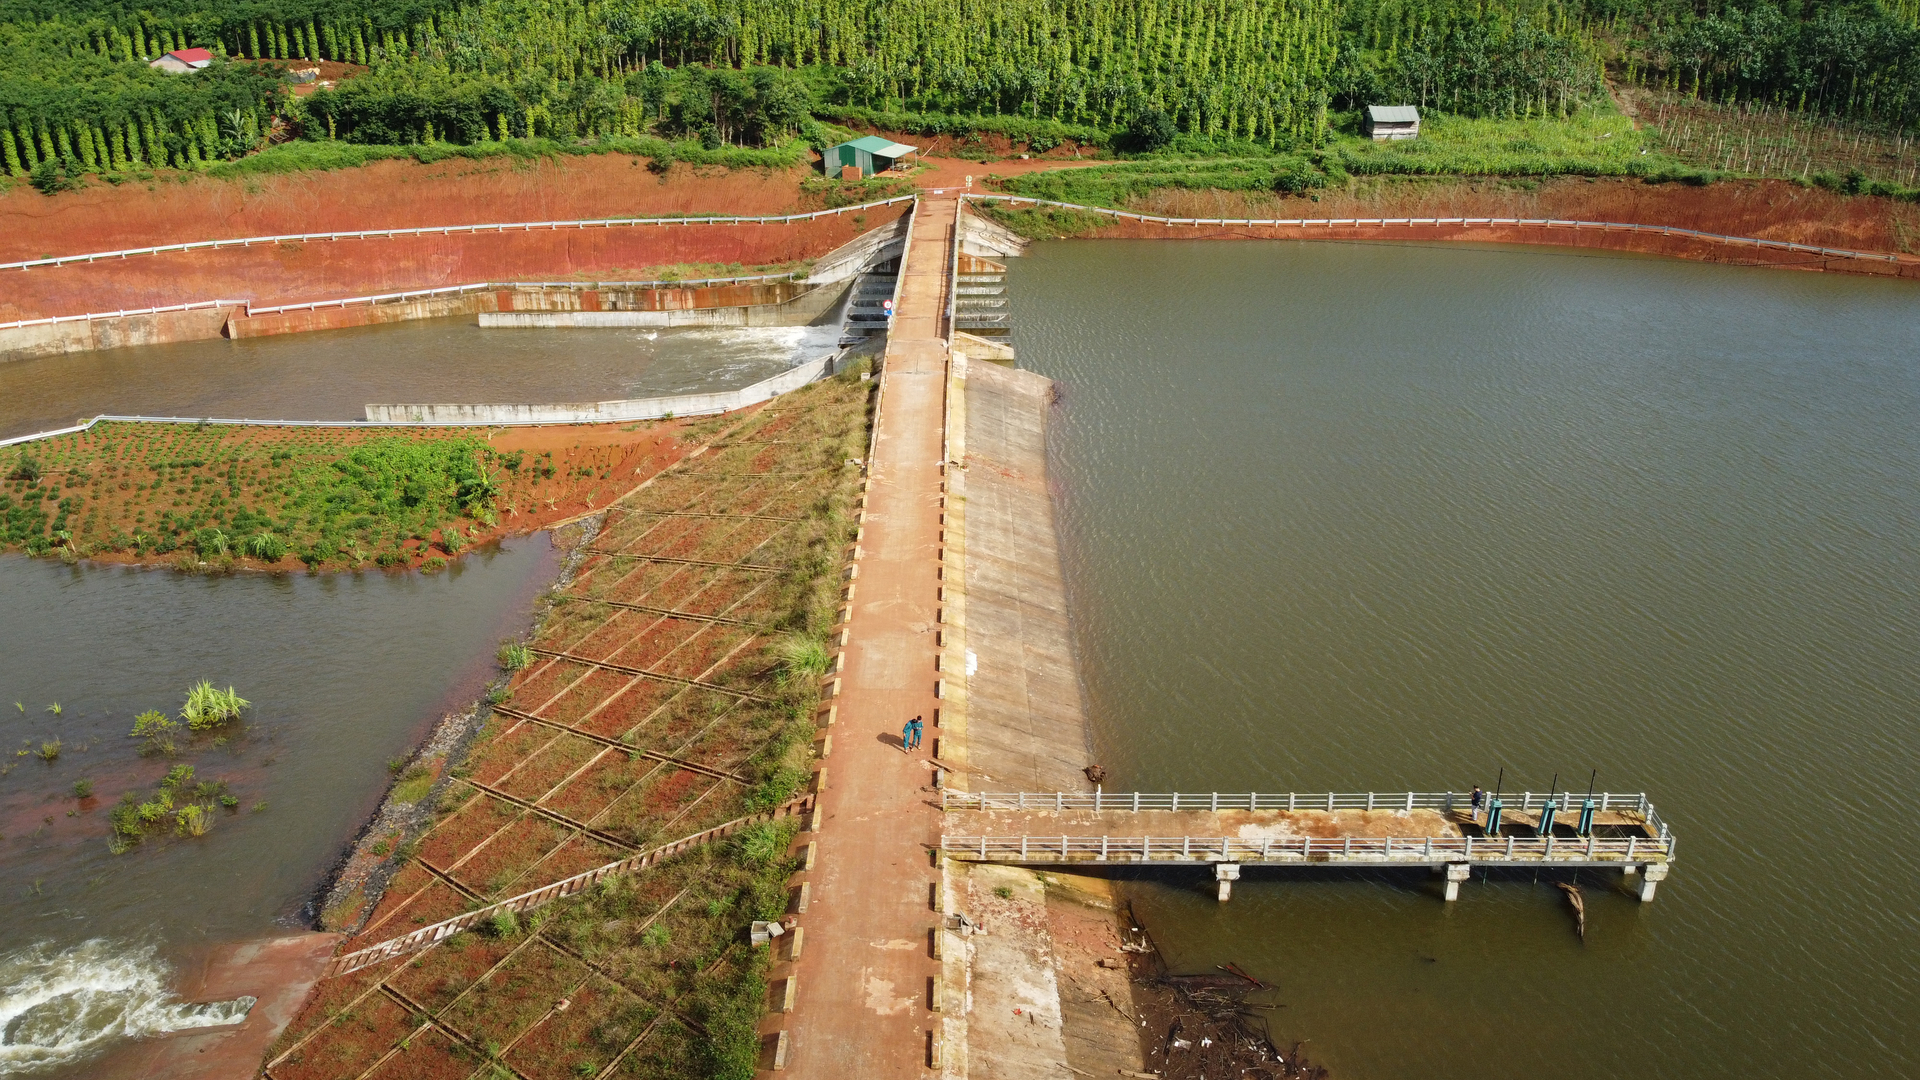 Dak N'ting irrigation works with a capacity of 1.2 million cubic meters of water are at risk of bursting. Photo: Quang Yen.